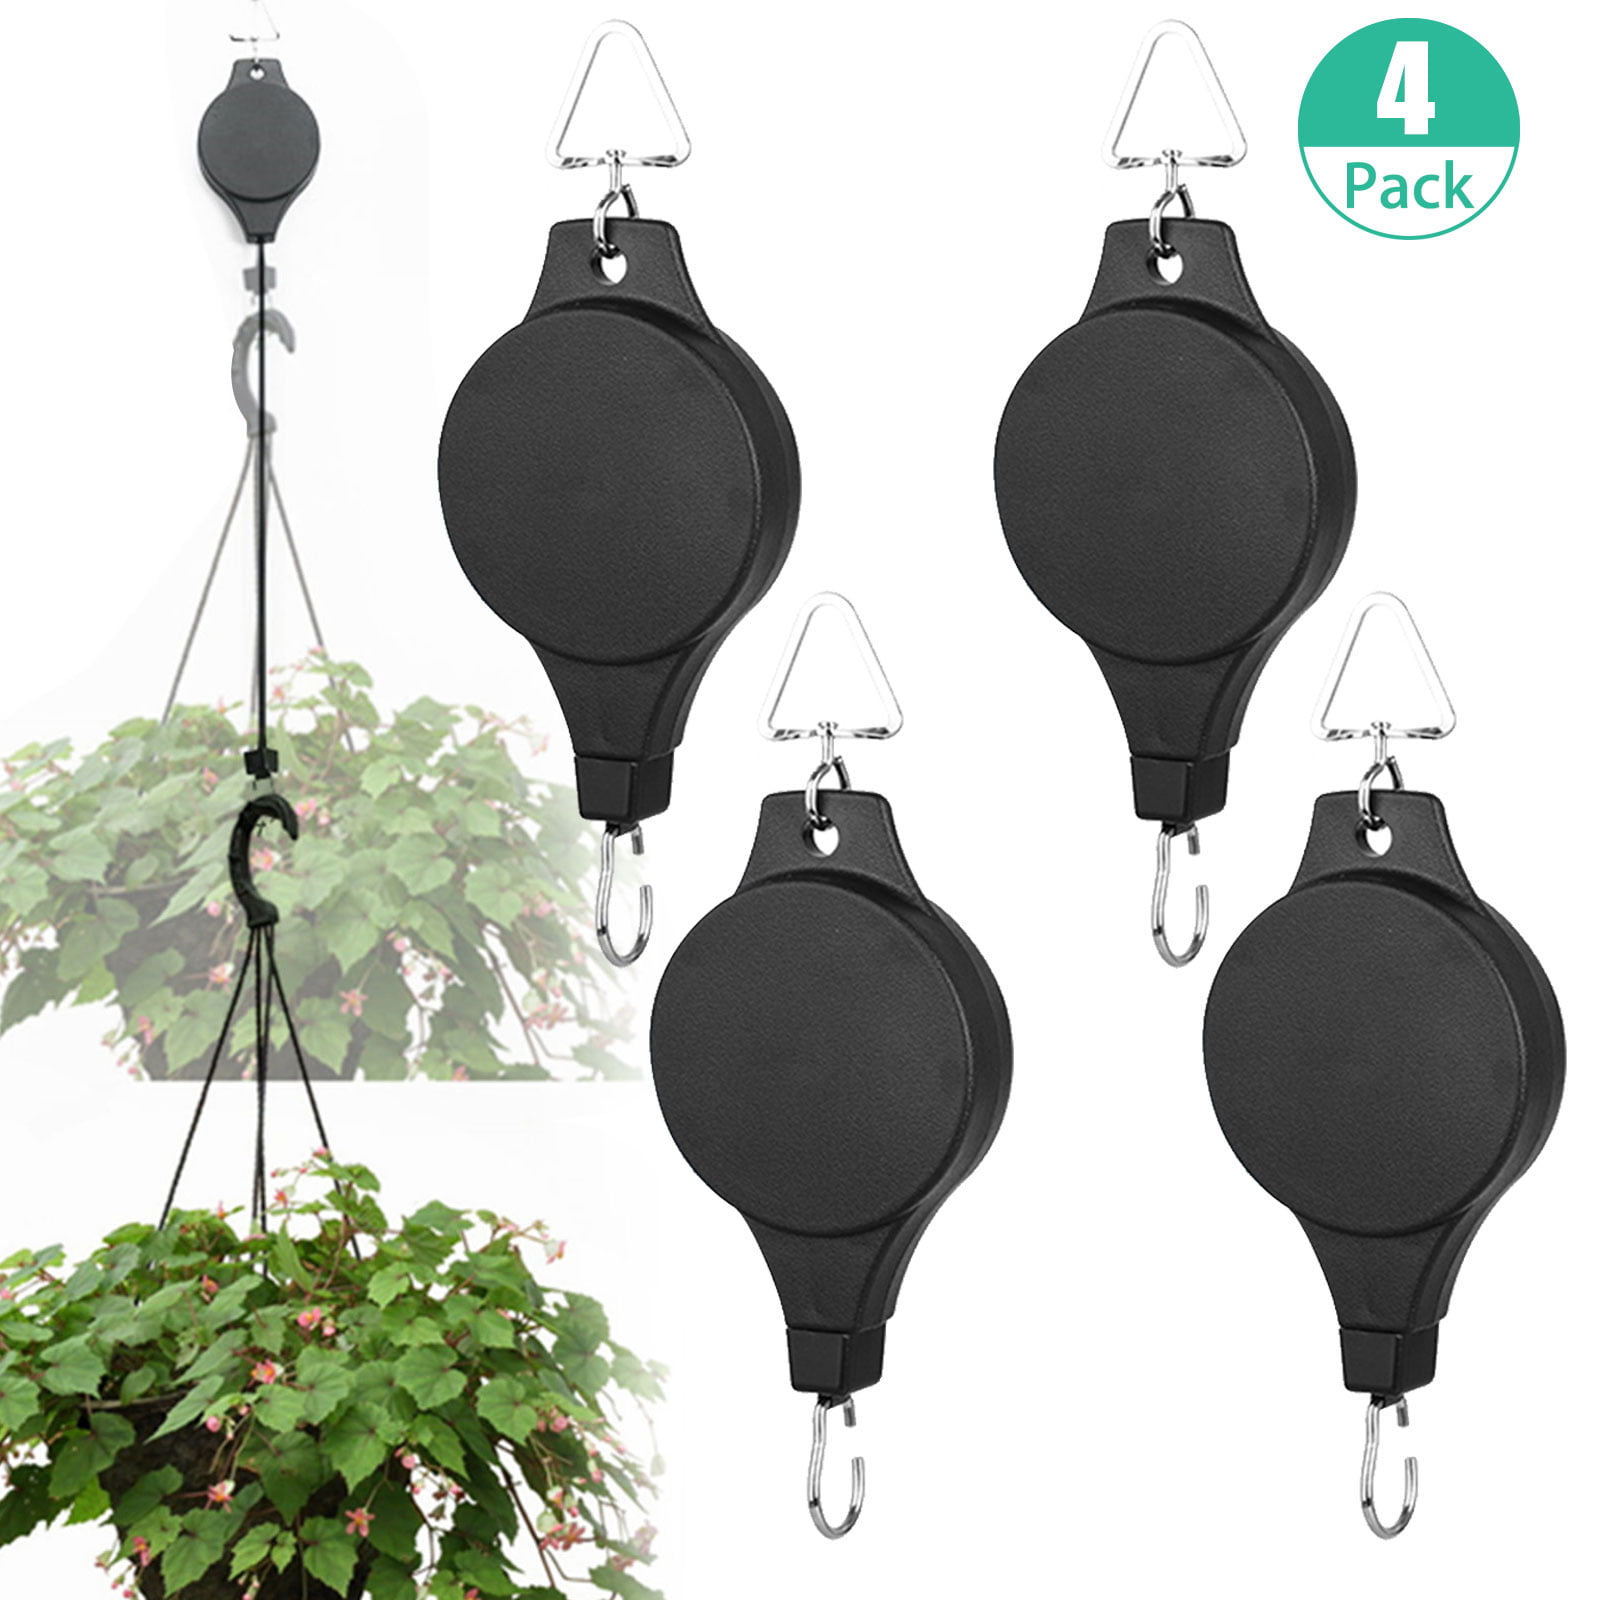 New Retractable Pull Down Plant Hanger Pulley Hanging Basket Extendable Hook USA 